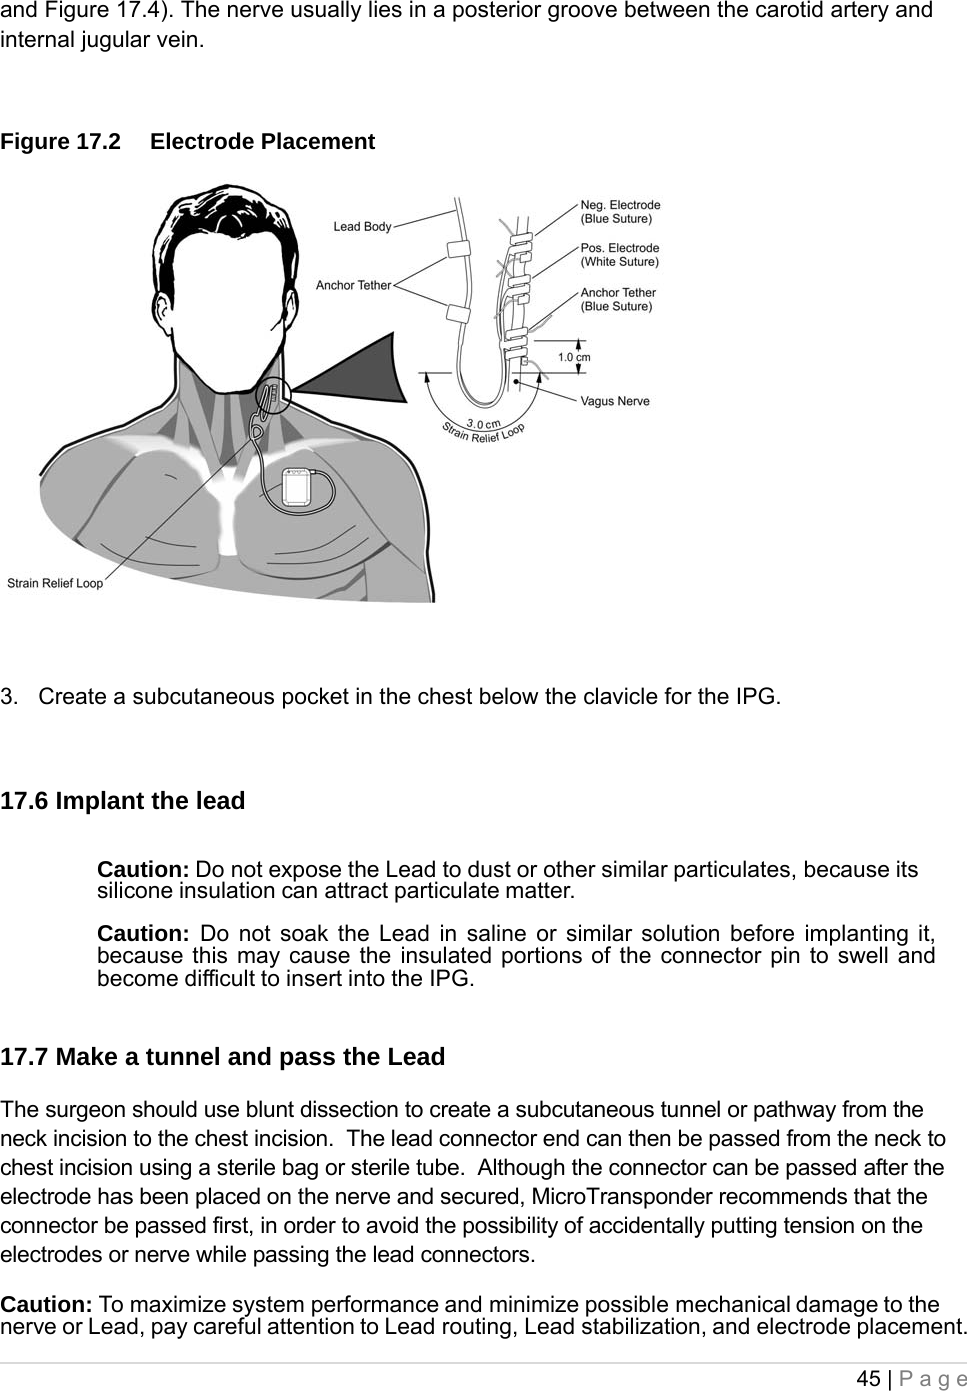 45 | Page  and Figure 17.4). The nerve usually lies in a posterior groove between the carotid artery and internal jugular vein.  Figure 17.2  Electrode Placement   3.   Create a subcutaneous pocket in the chest below the clavicle for the IPG.  17.6 Implant the lead  Caution: Do not expose the Lead to dust or other similar particulates, because its silicone insulation can attract particulate matter.  Caution:  Do not soak the Lead in saline or similar solution before implanting it, because this may cause the insulated portions of the connector pin to swell and become difficult to insert into the IPG.  17.7 Make a tunnel and pass the Lead The surgeon should use blunt dissection to create a subcutaneous tunnel or pathway from the neck incision to the chest incision.  The lead connector end can then be passed from the neck to chest incision using a sterile bag or sterile tube.  Although the connector can be passed after the electrode has been placed on the nerve and secured, MicroTransponder recommends that the connector be passed first, in order to avoid the possibility of accidentally putting tension on the electrodes or nerve while passing the lead connectors.  Caution: To maximize system performance and minimize possible mechanical damage to the nerve or Lead, pay careful attention to Lead routing, Lead stabilization, and electrode placement. 